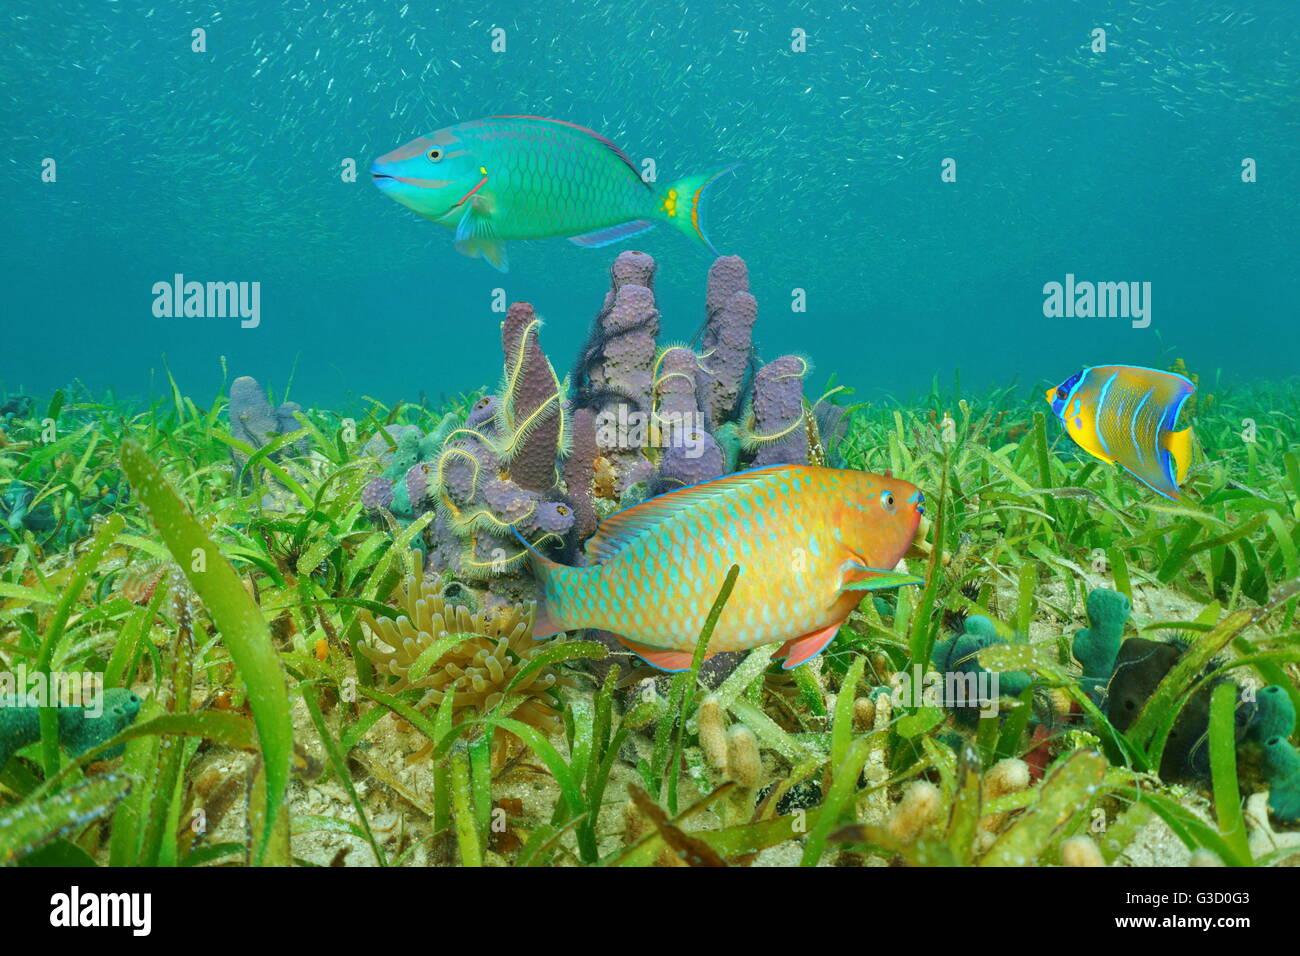 Underwater marine life on a grassy seabed with sea sponges and colorful tropical fish, Caribbean sea Stock Photo